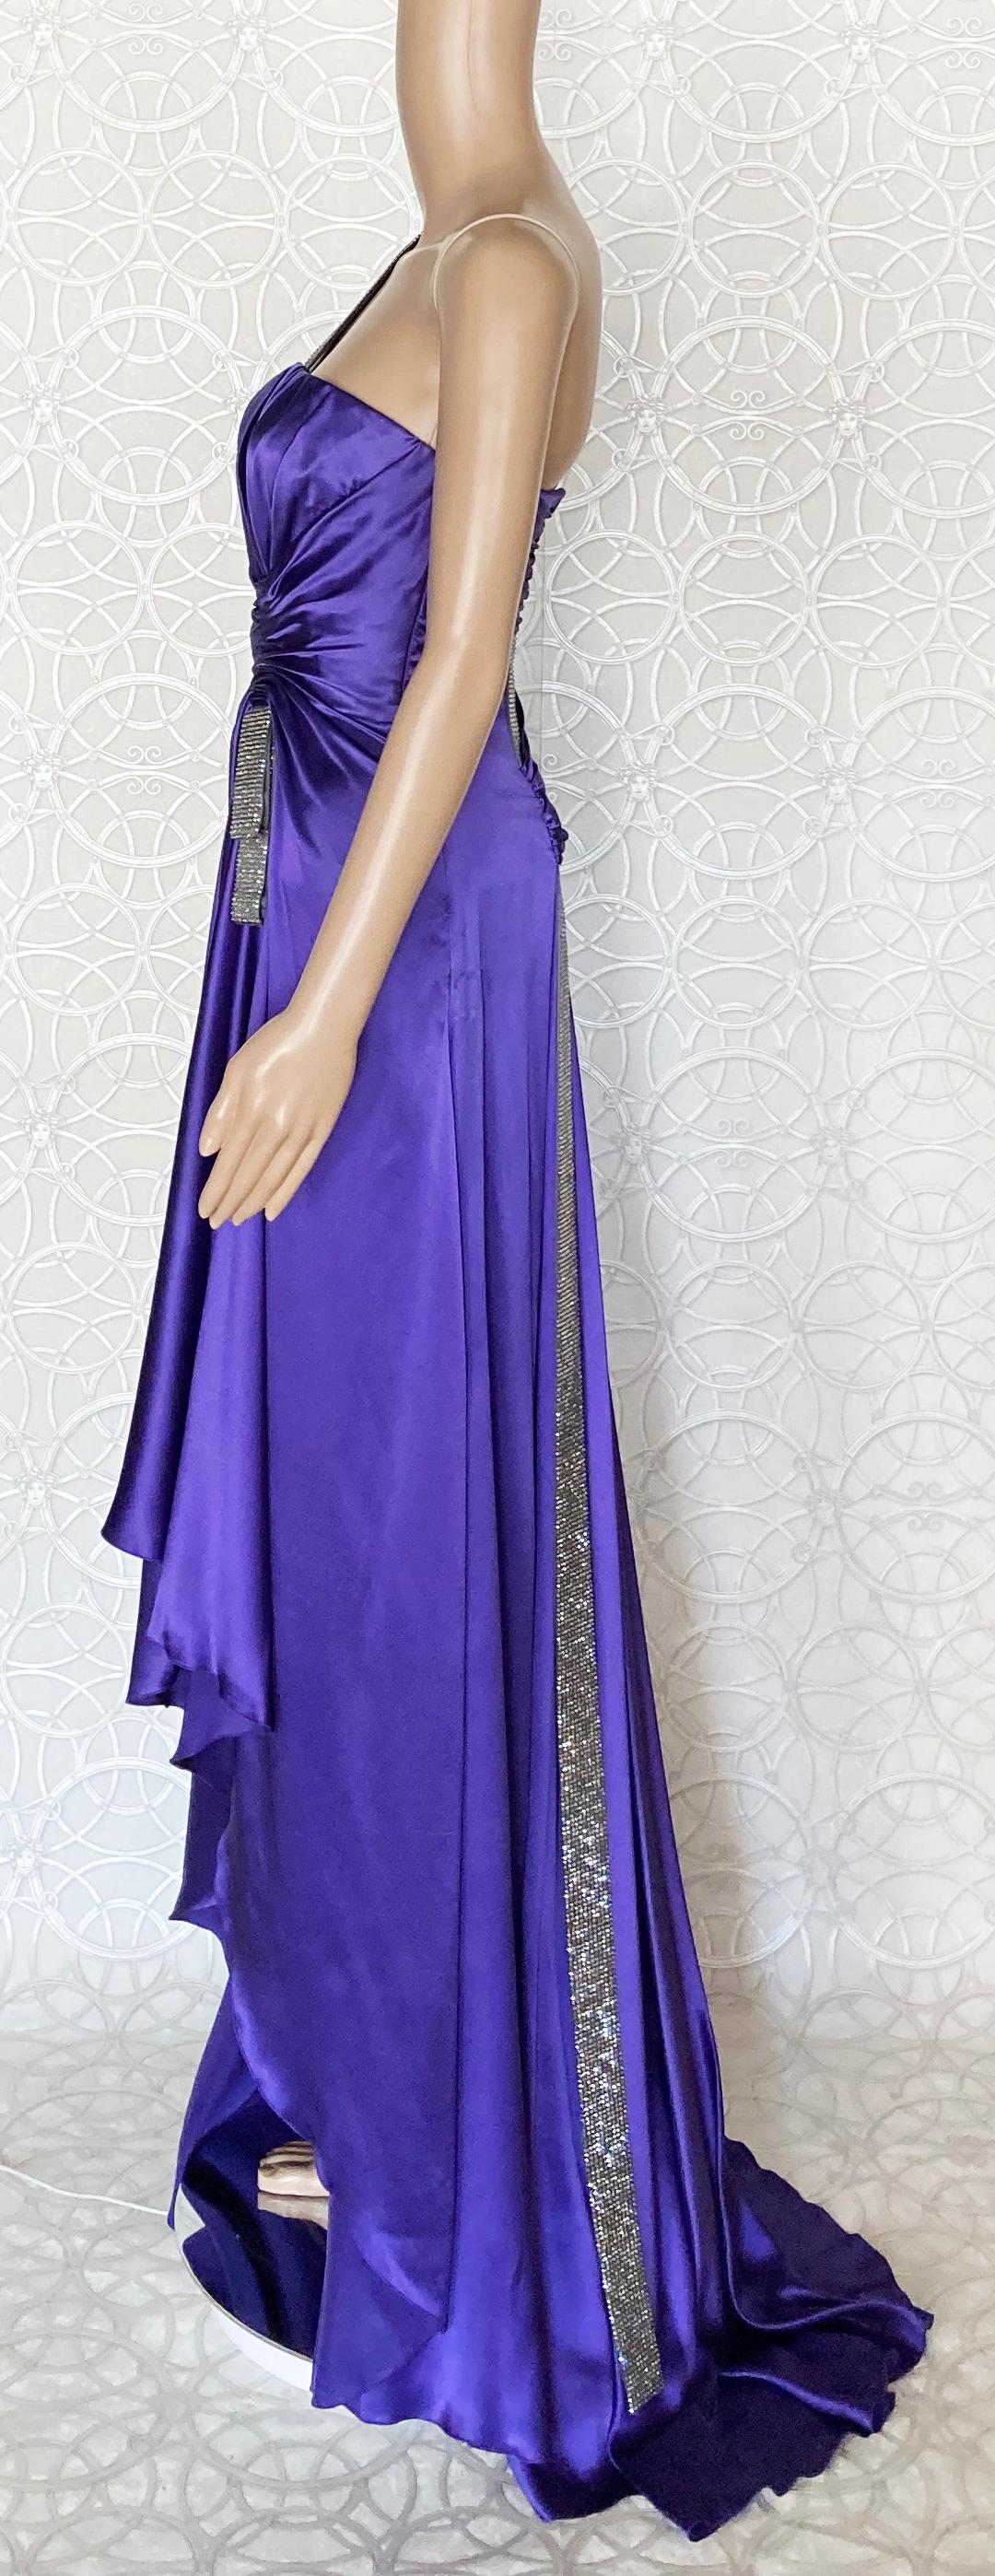 $8, 935 NEW VERSACE PURPLE CRYSTAL EMBELLISHED LONG 100% SILK DRESS Gown 38 - 2 For Sale 1